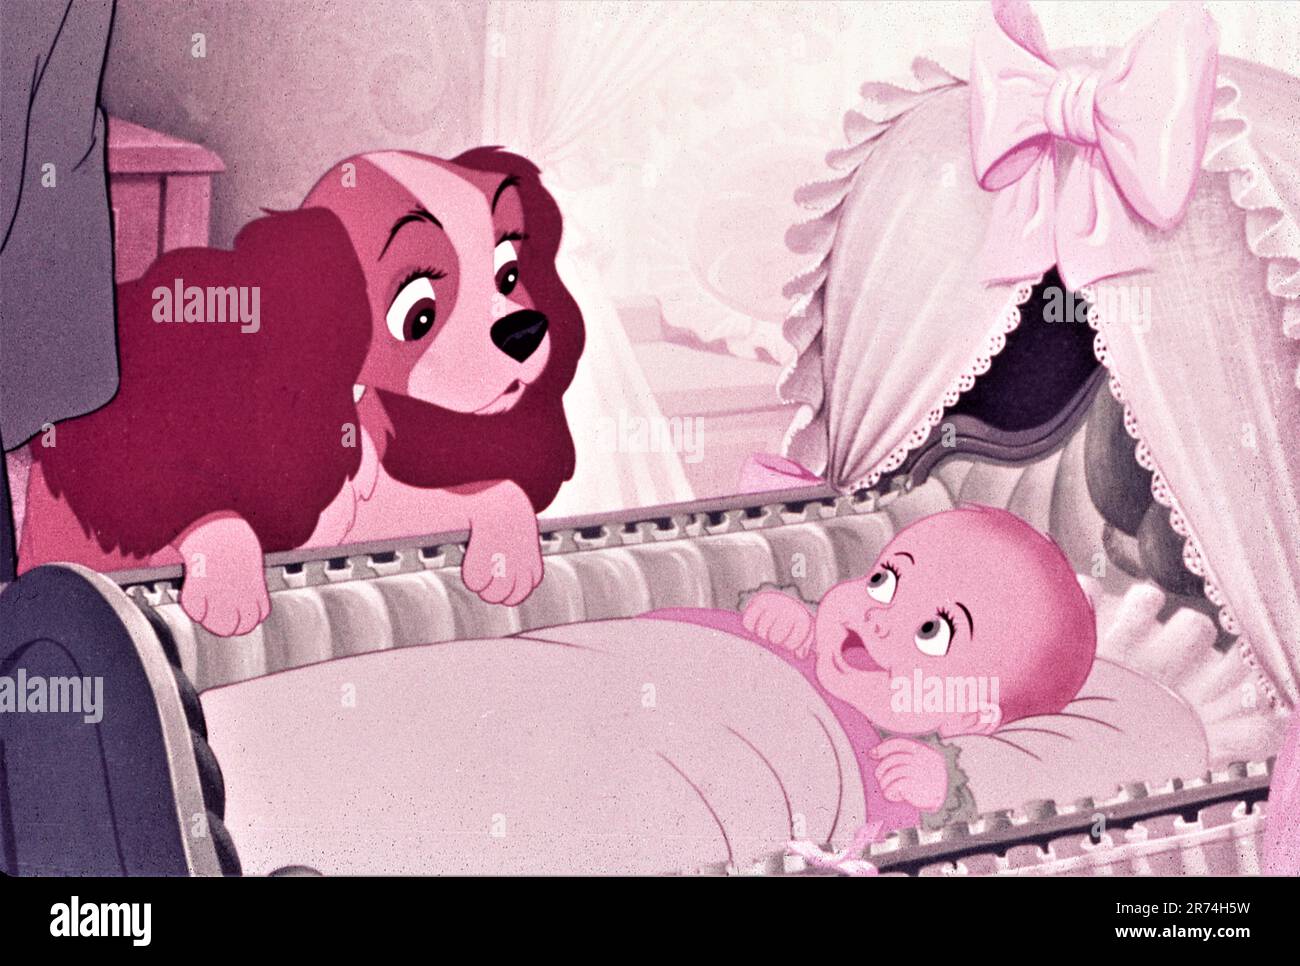 Lady with new baby in WALT DISNEY'S LADY AND THE TRAMP 1955 directors CLYDE GERONIMI WILFRED JACKSON and HAMILTON LUSKE from the story by Ward Greene Walt Disney productions / Buena Vista Film Distribution Company Stock Photo